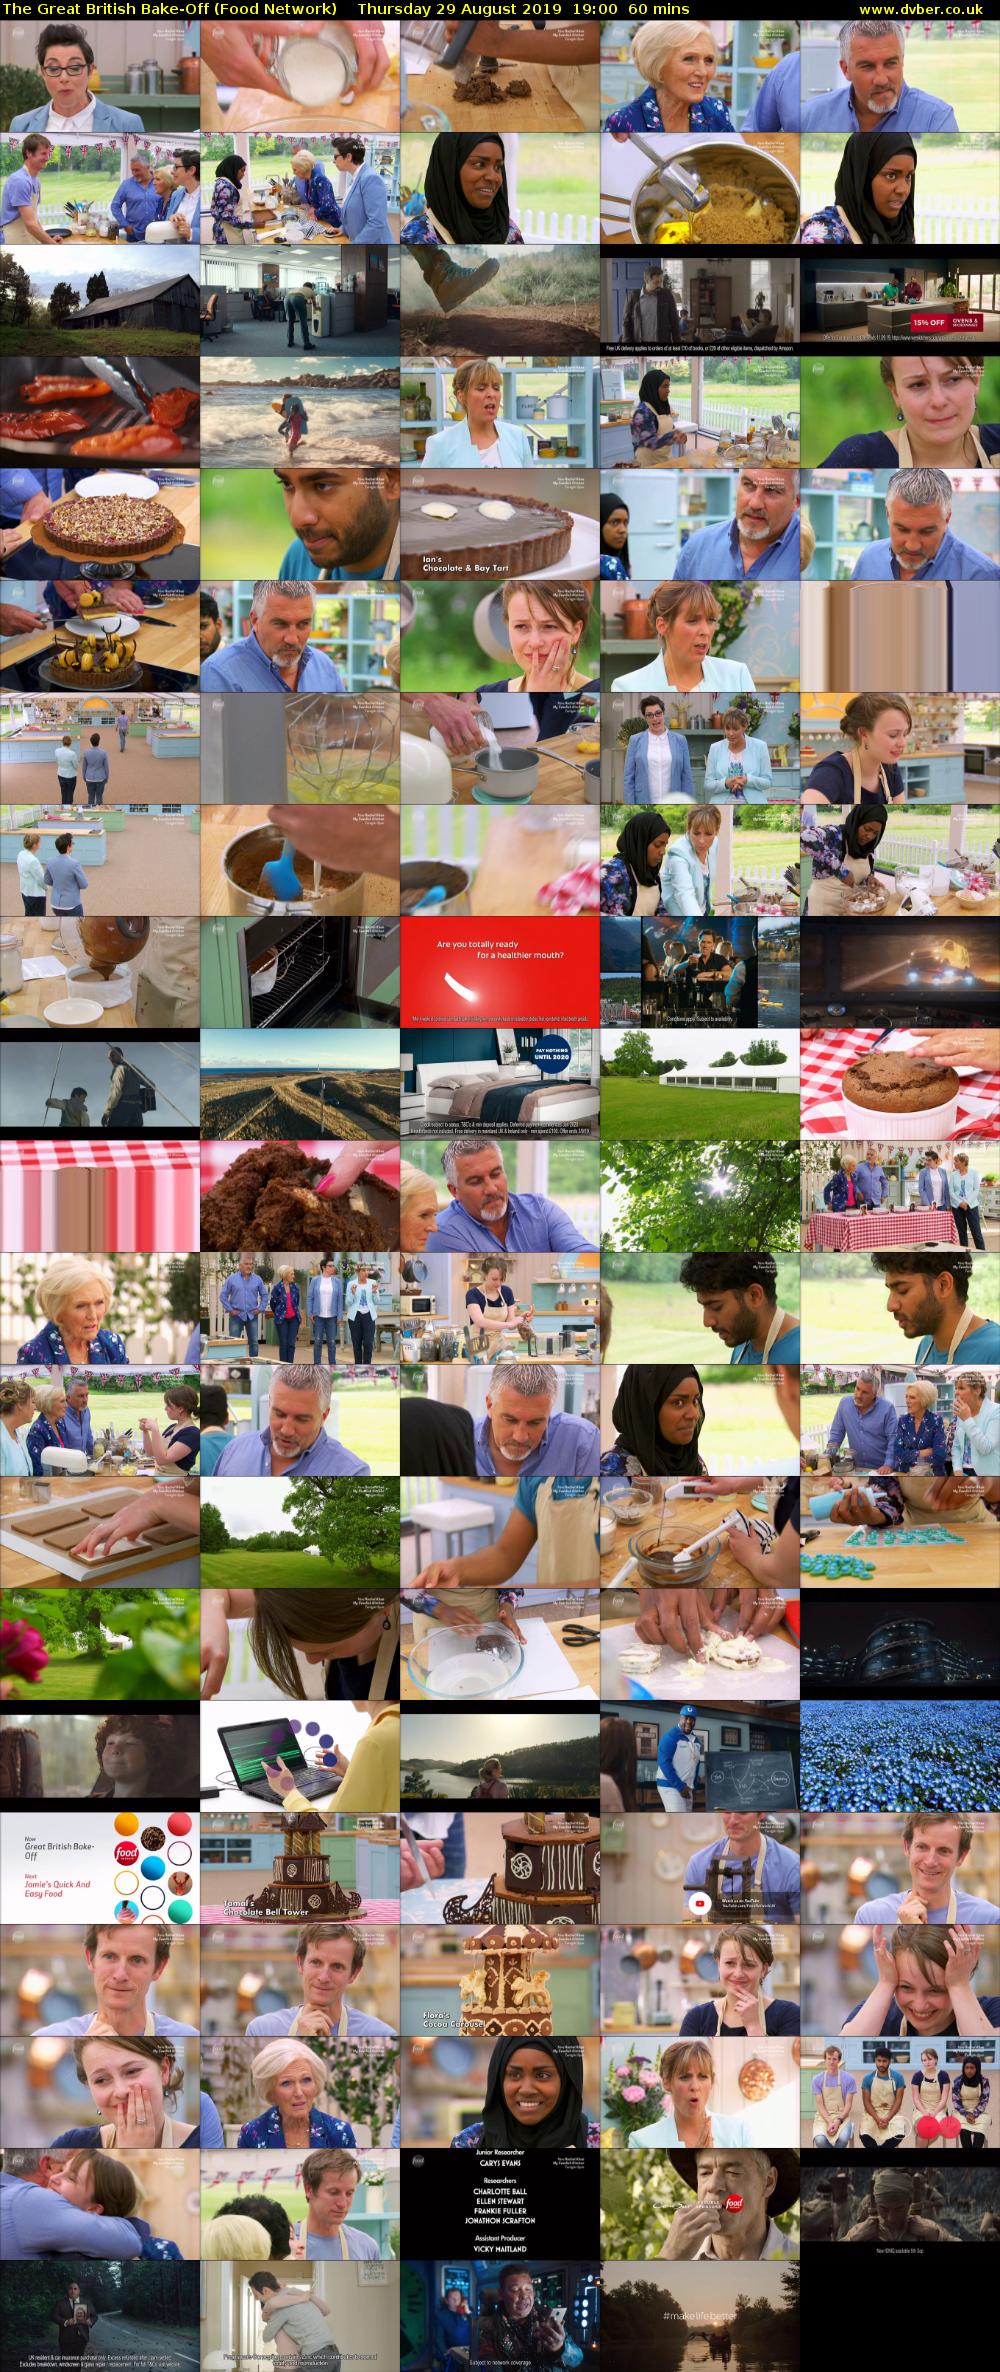 The Great British Bake-Off (Food Network) Thursday 29 August 2019 19:00 - 20:00